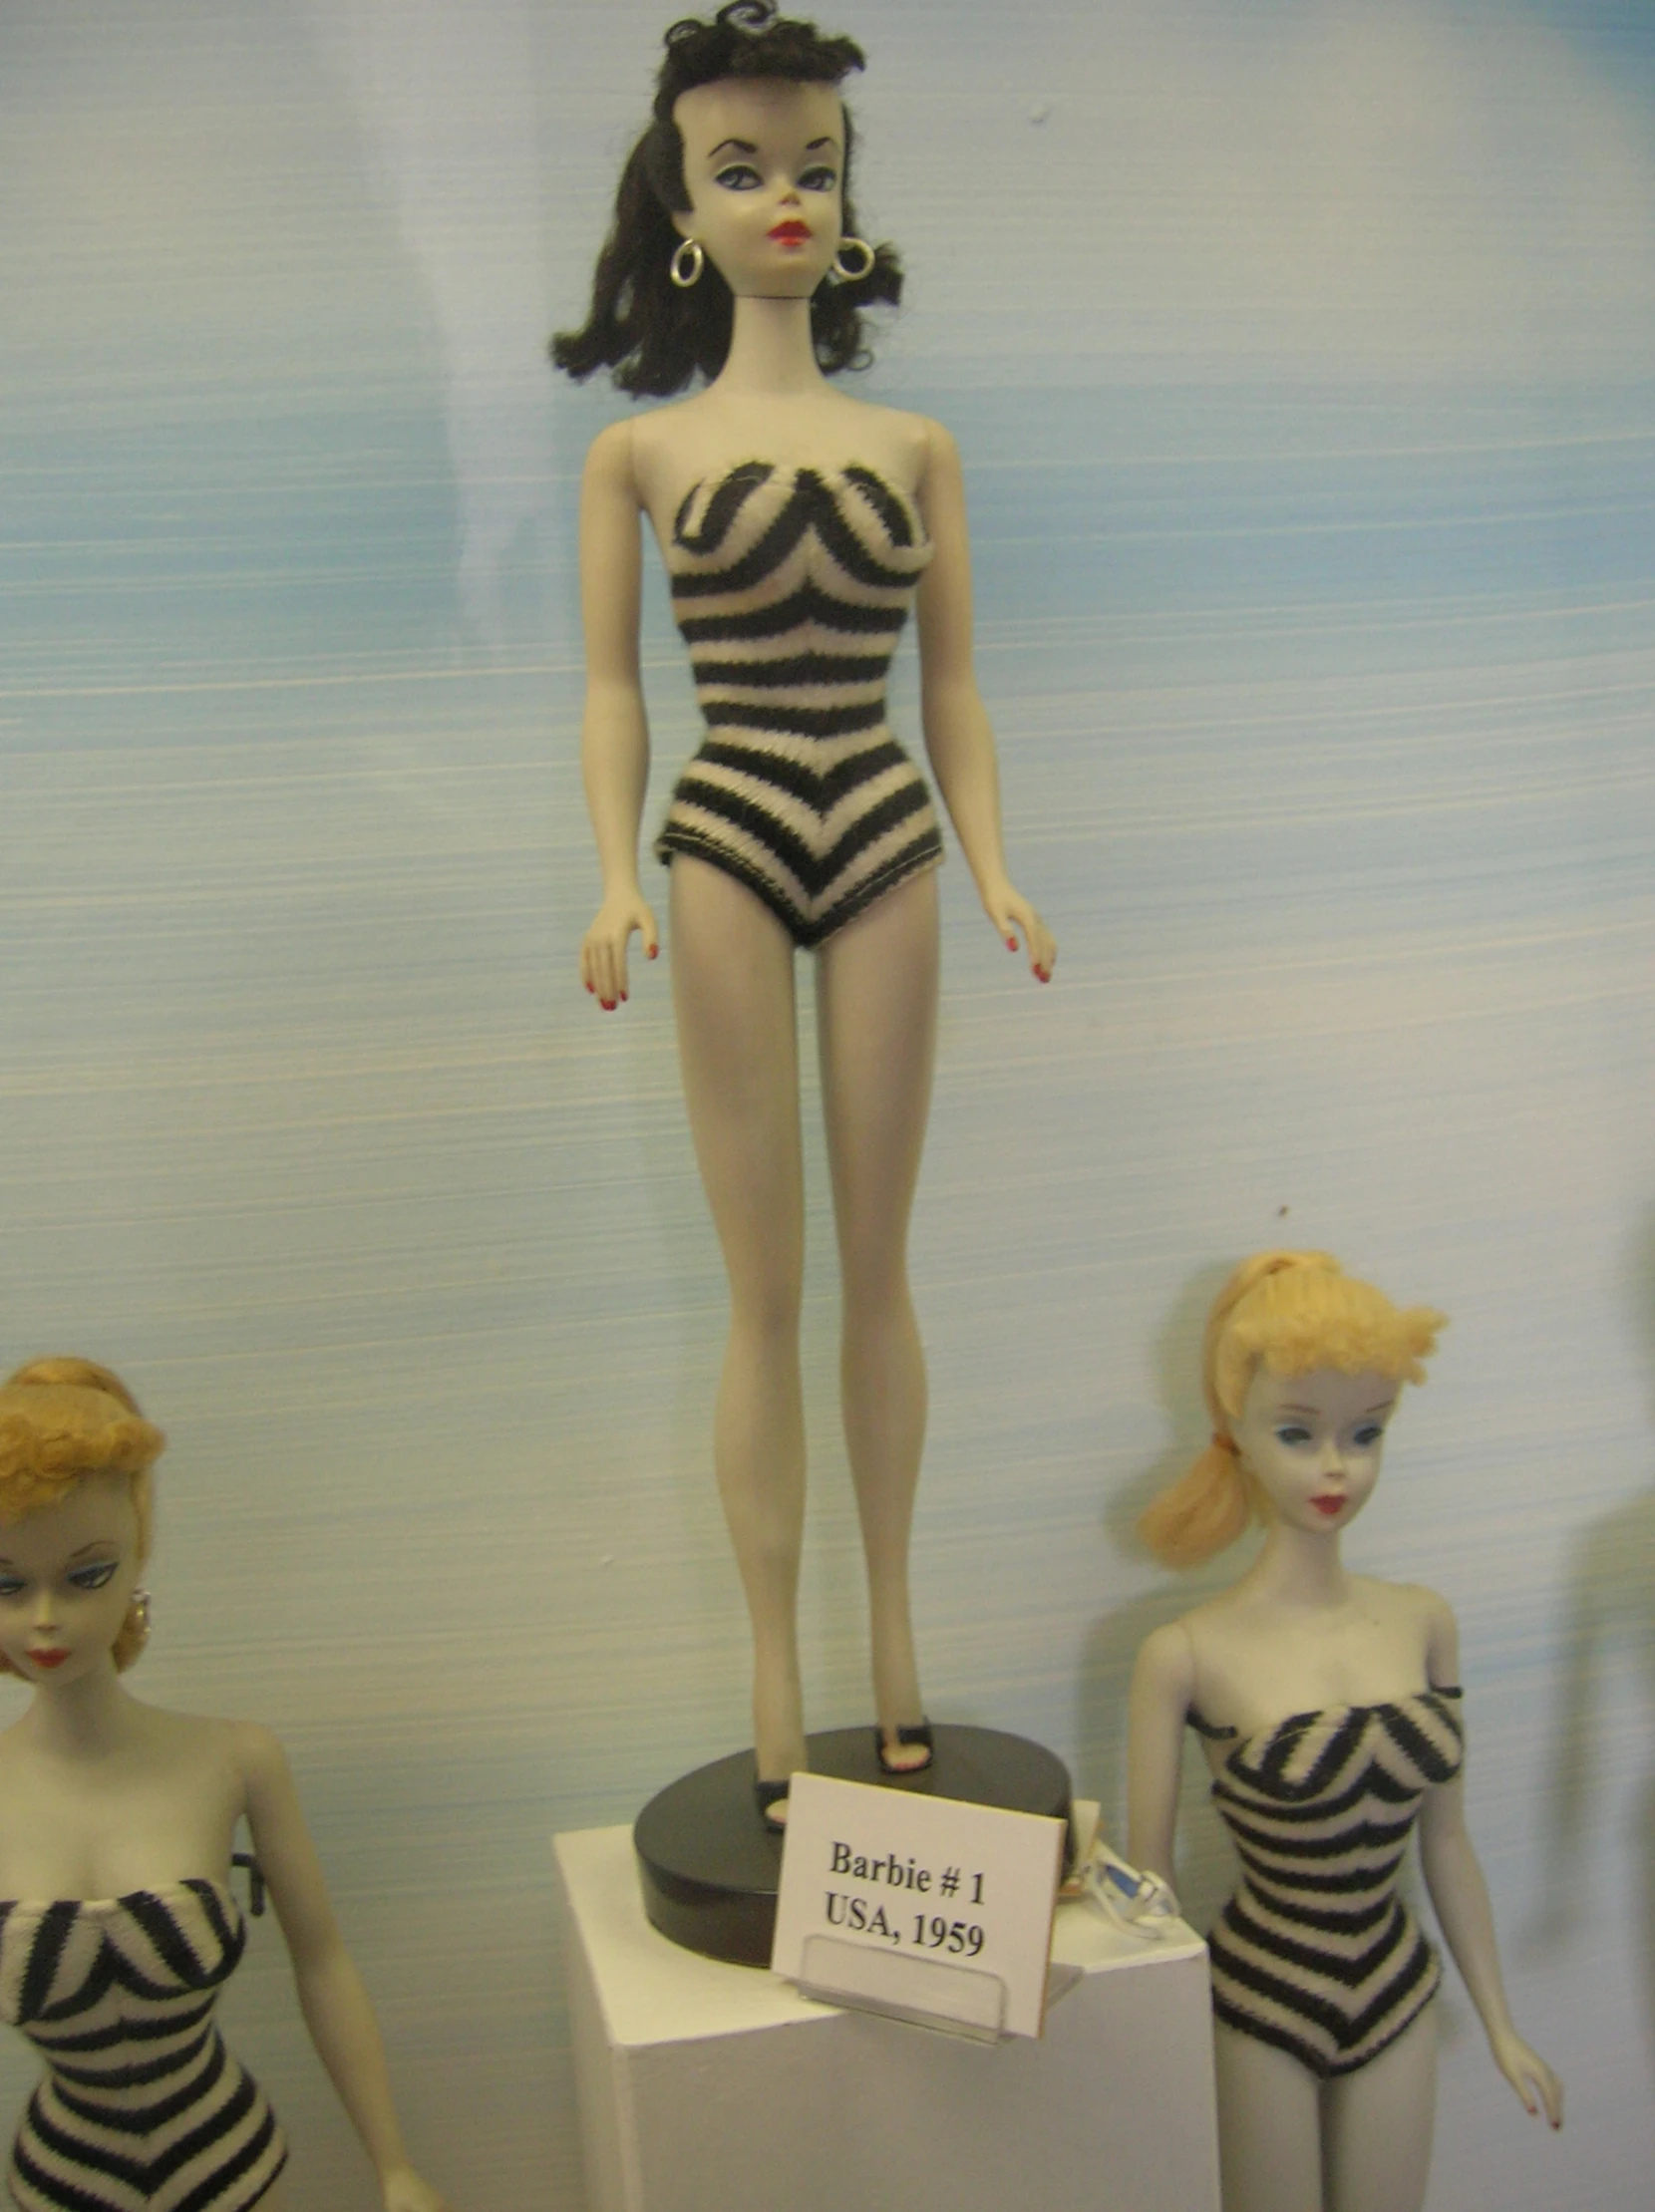 dolls are lined up on display, in a room